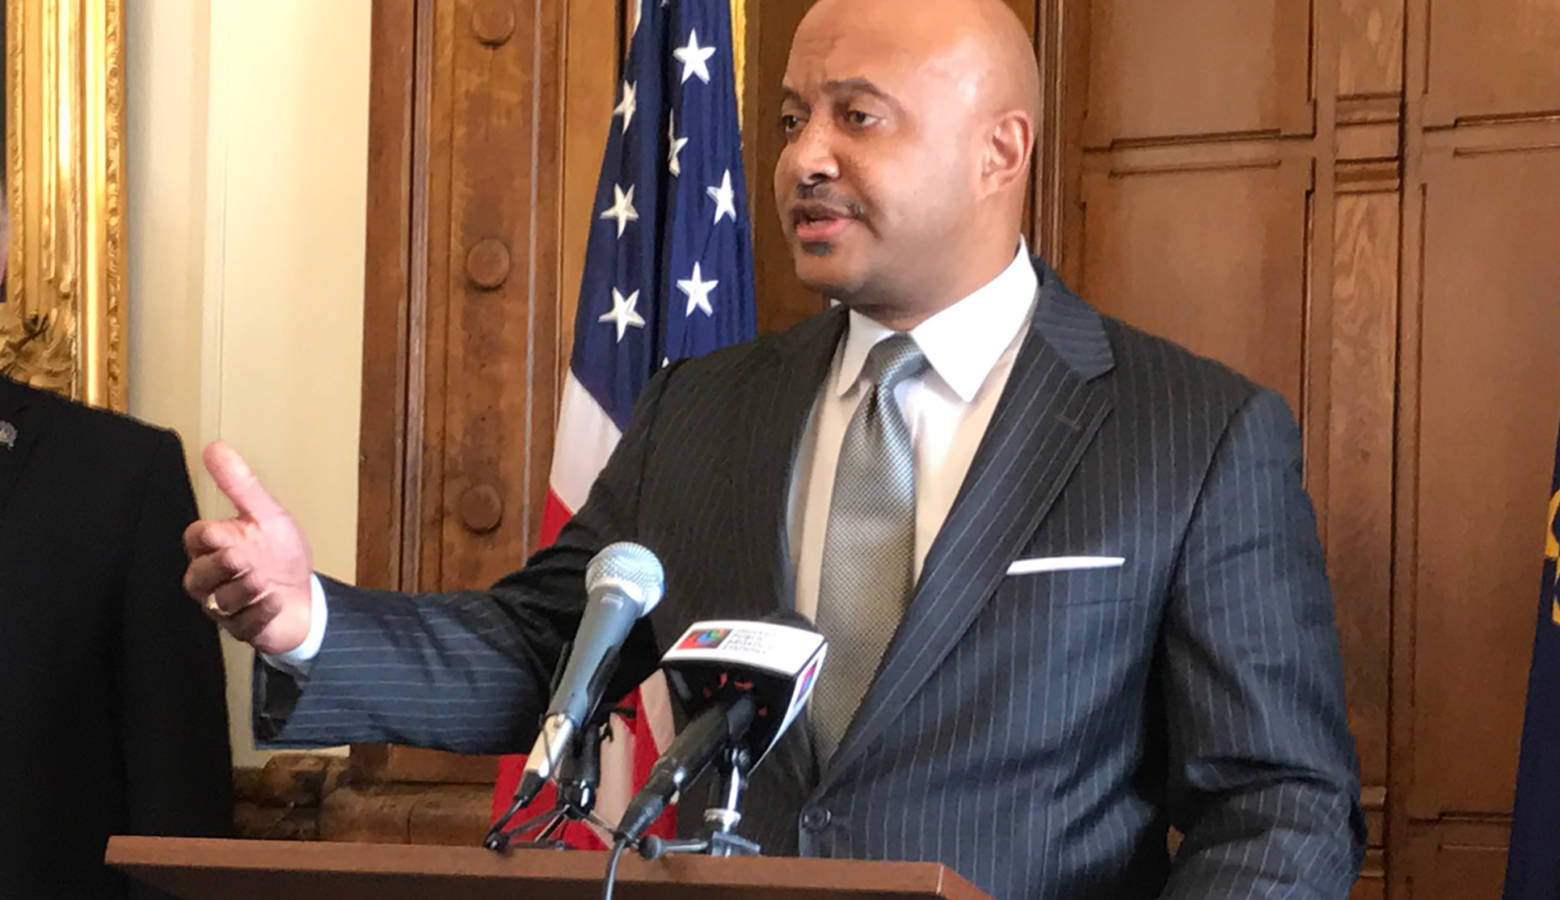 Attorney General Curtis Hill has been accused of groping four women – three legislative staffers and one lawmaker. (Brandon Smith/IPB News)